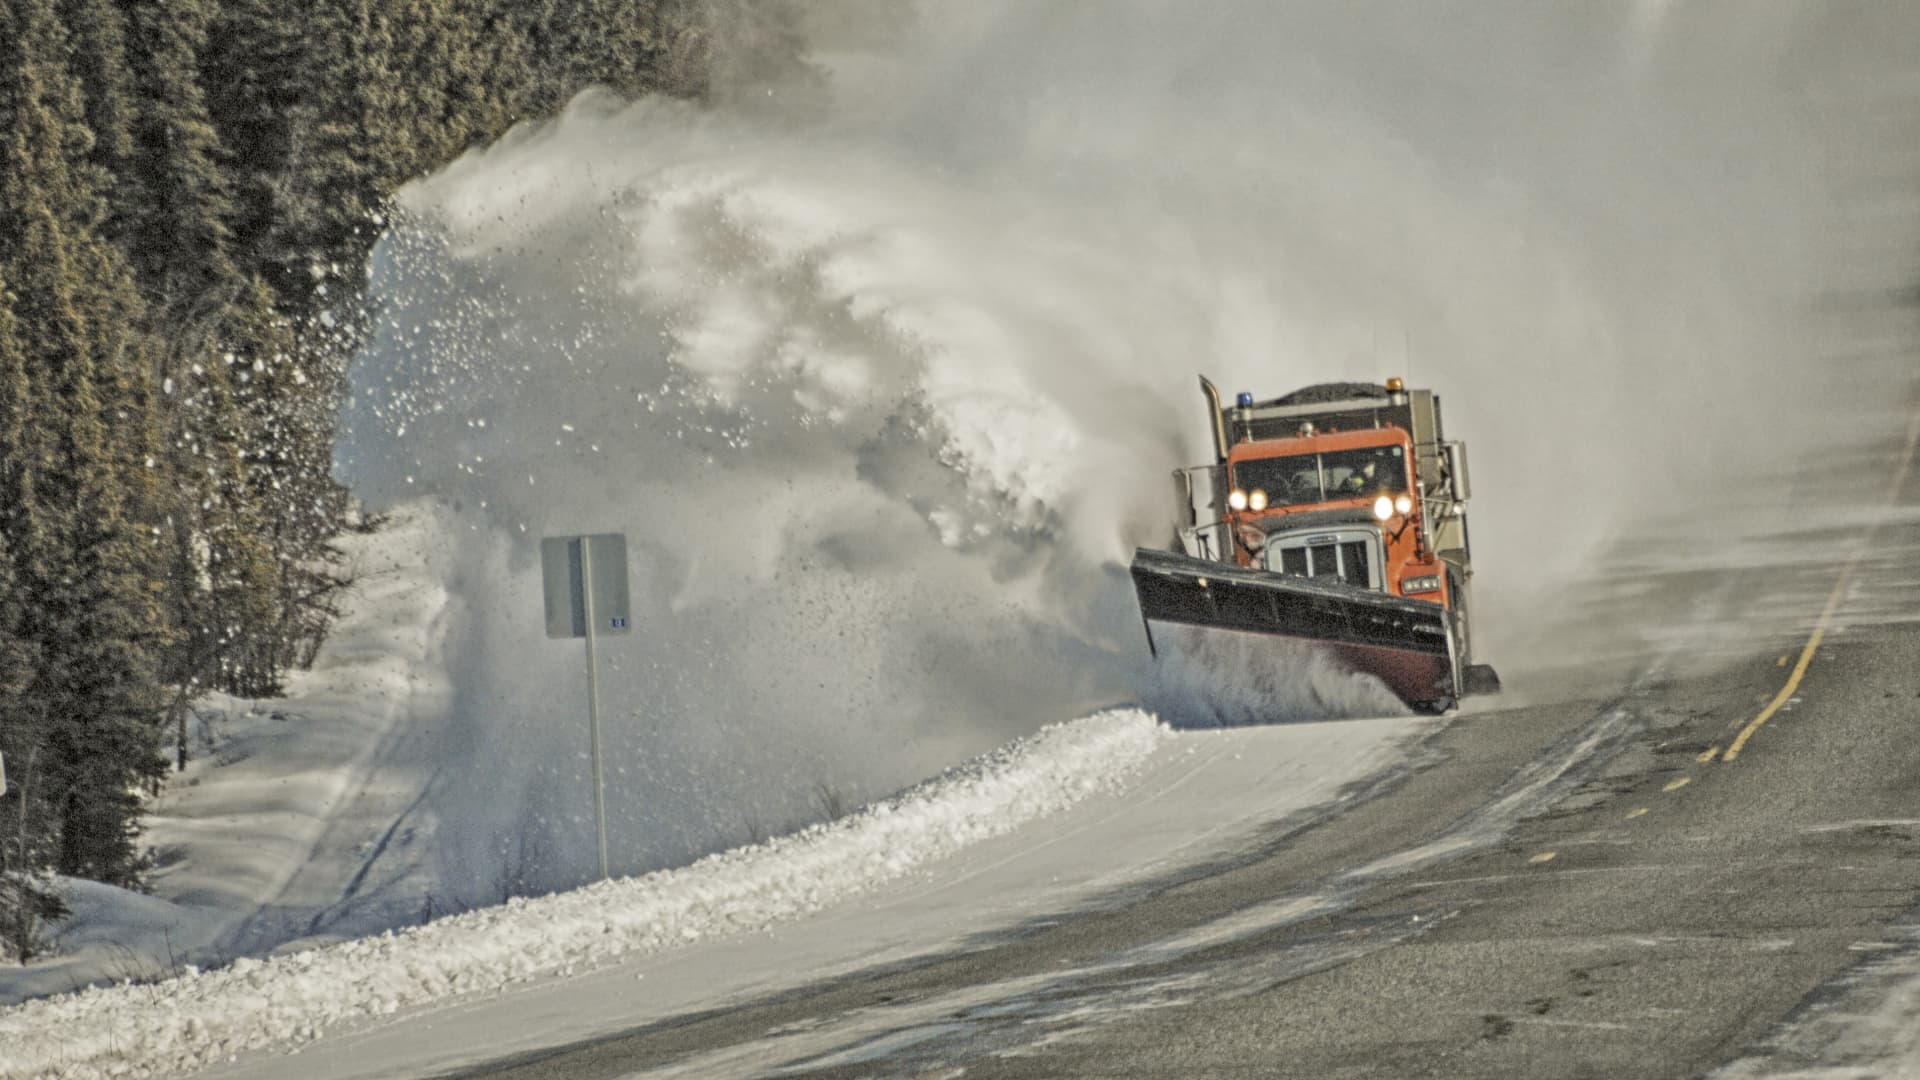 Orange snowplow makes its way down the highway, clearing the snow as it goes.Picture was taken in Interior Alaska on a bright day in winter.